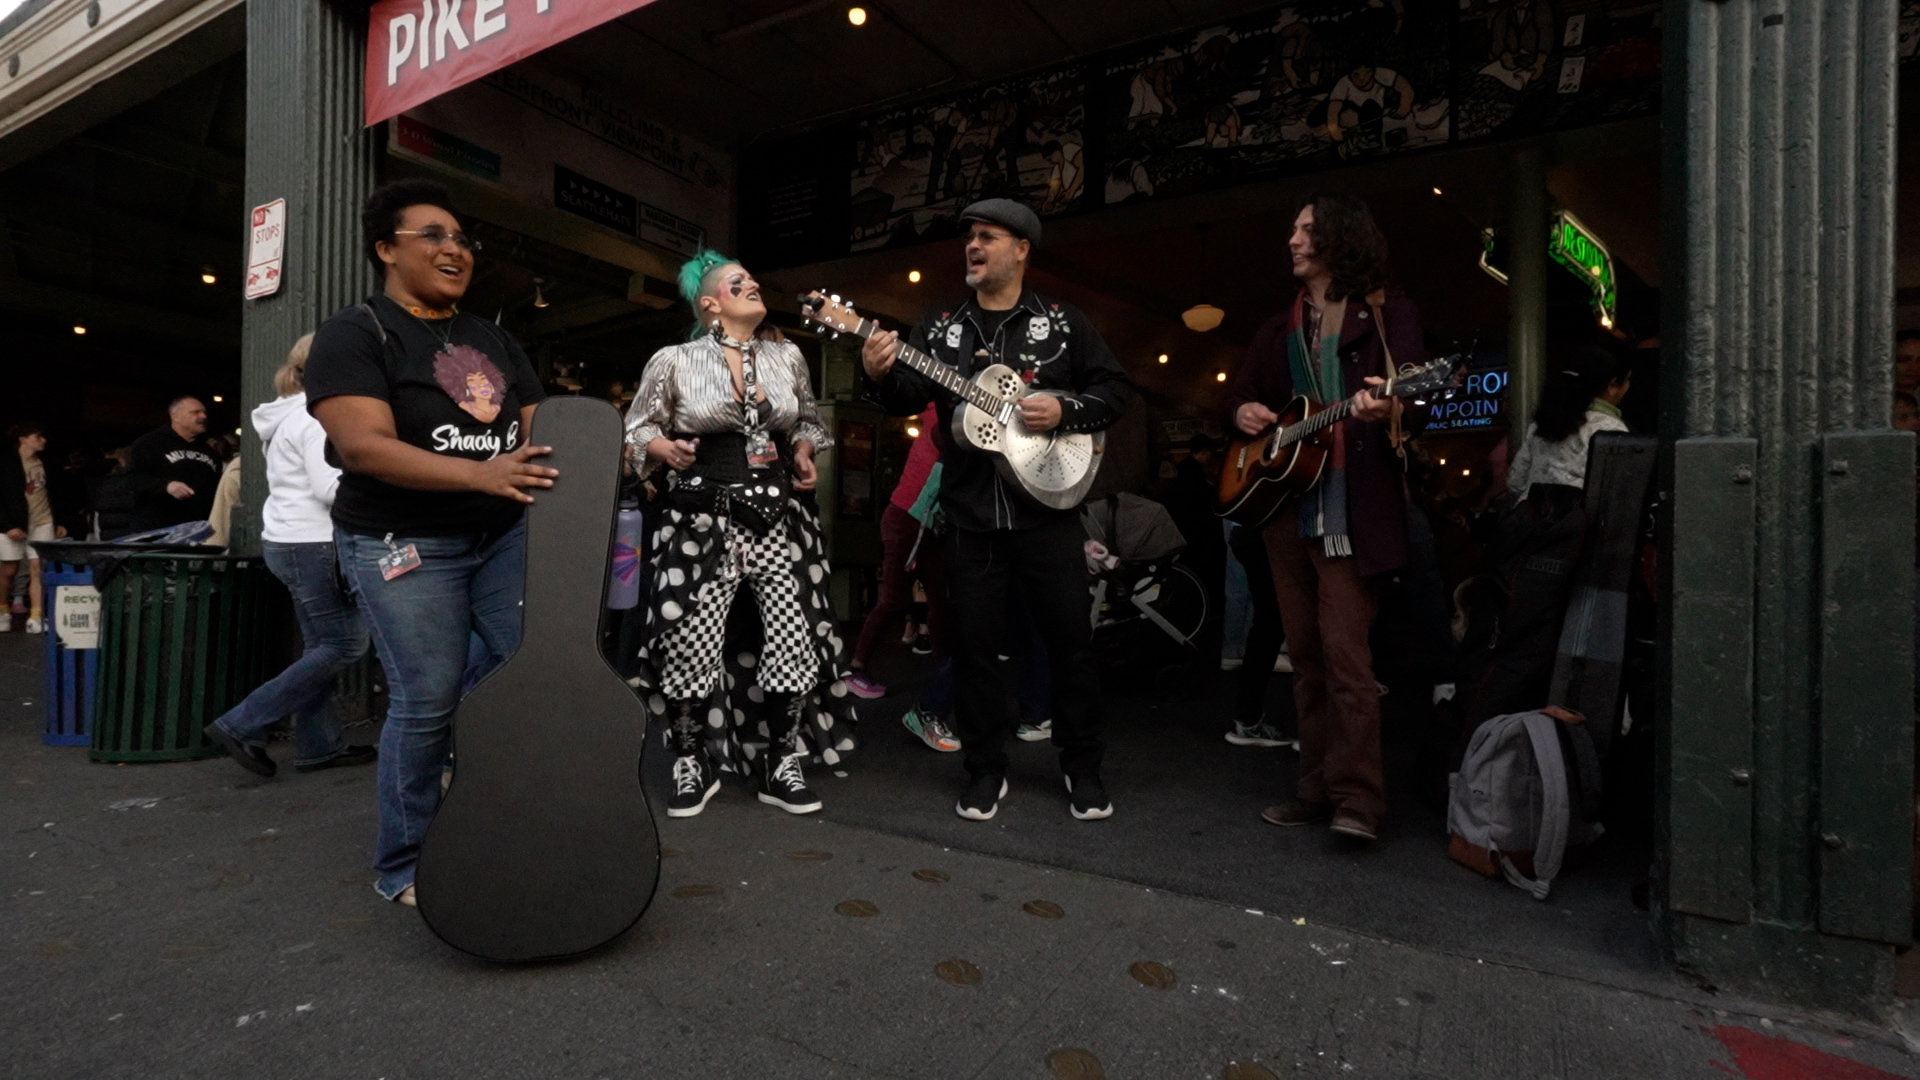 Pike Place Market is one of the most iconic spots for busking. #k5evening